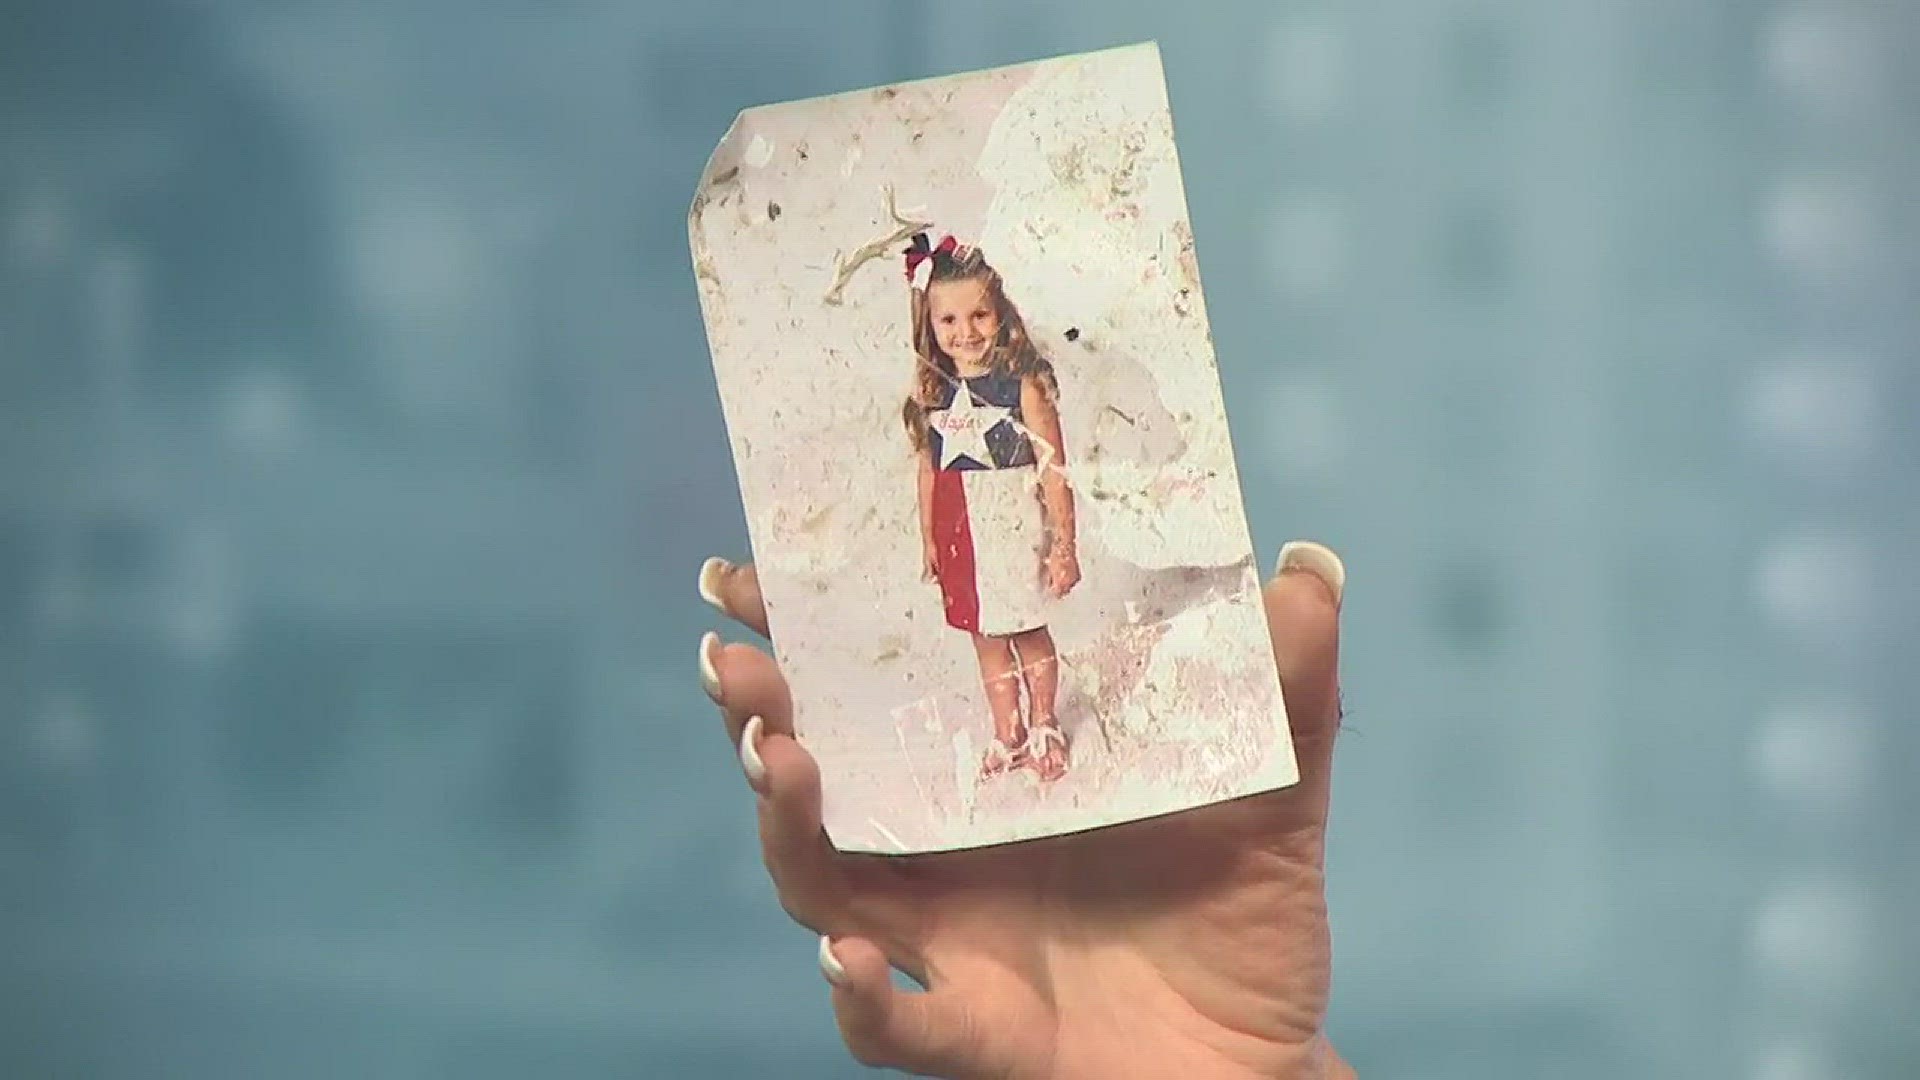 Museum of the Gulf Coast curator Sarah Bellian with some helpful hints for saving your family photos that were damaged in the floodwater.